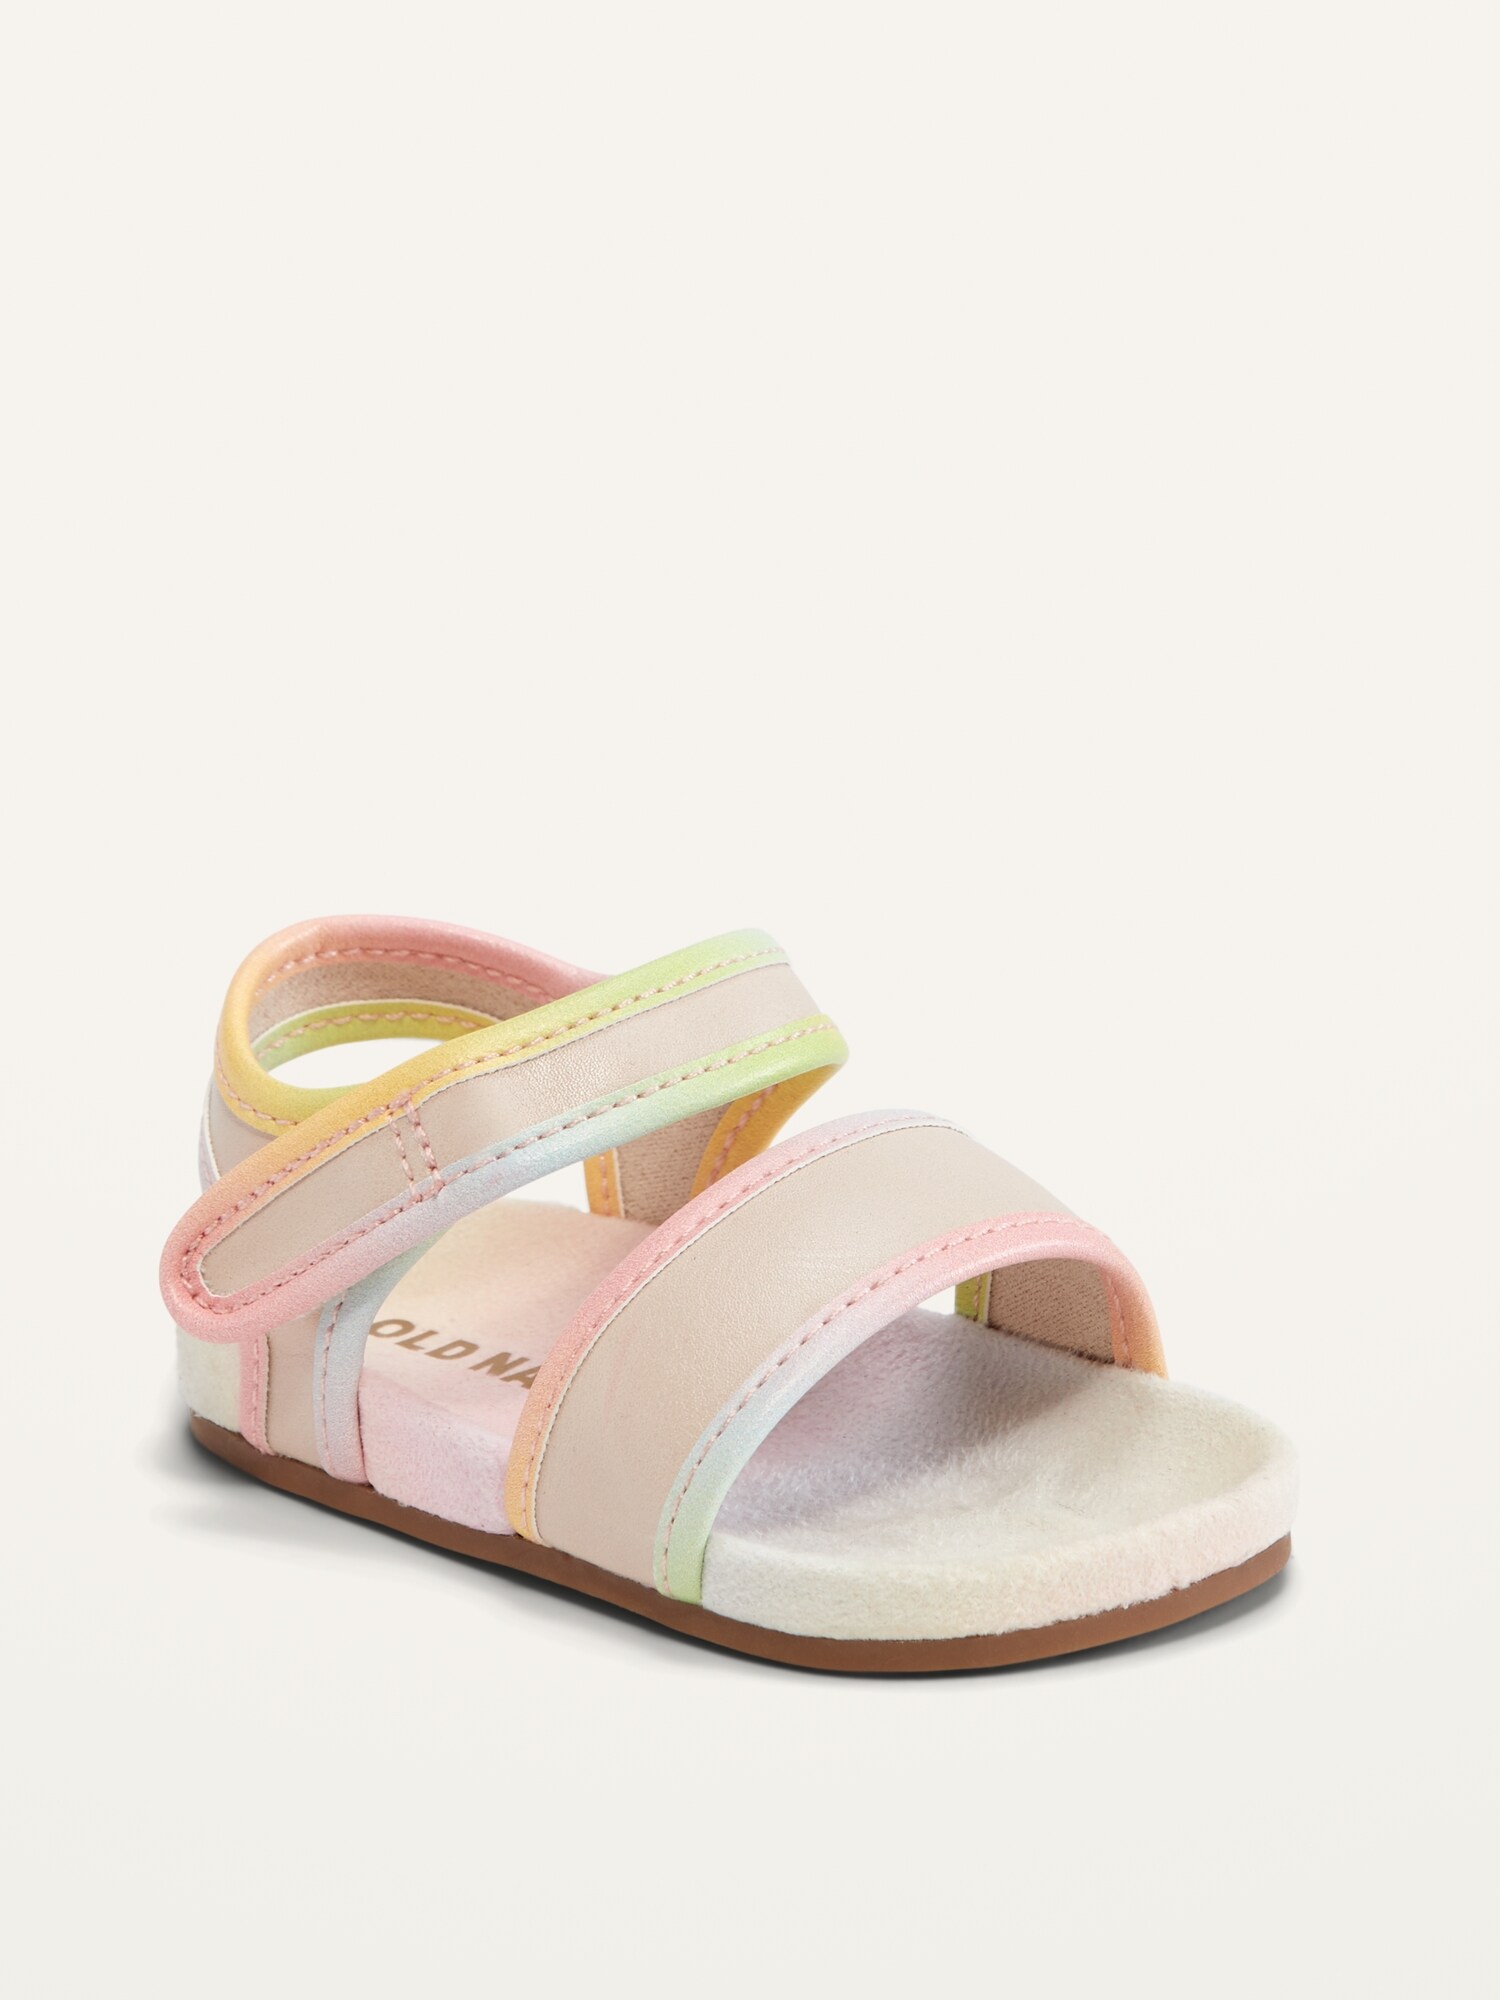 Double-Strap Secure-Close Sandals for Baby